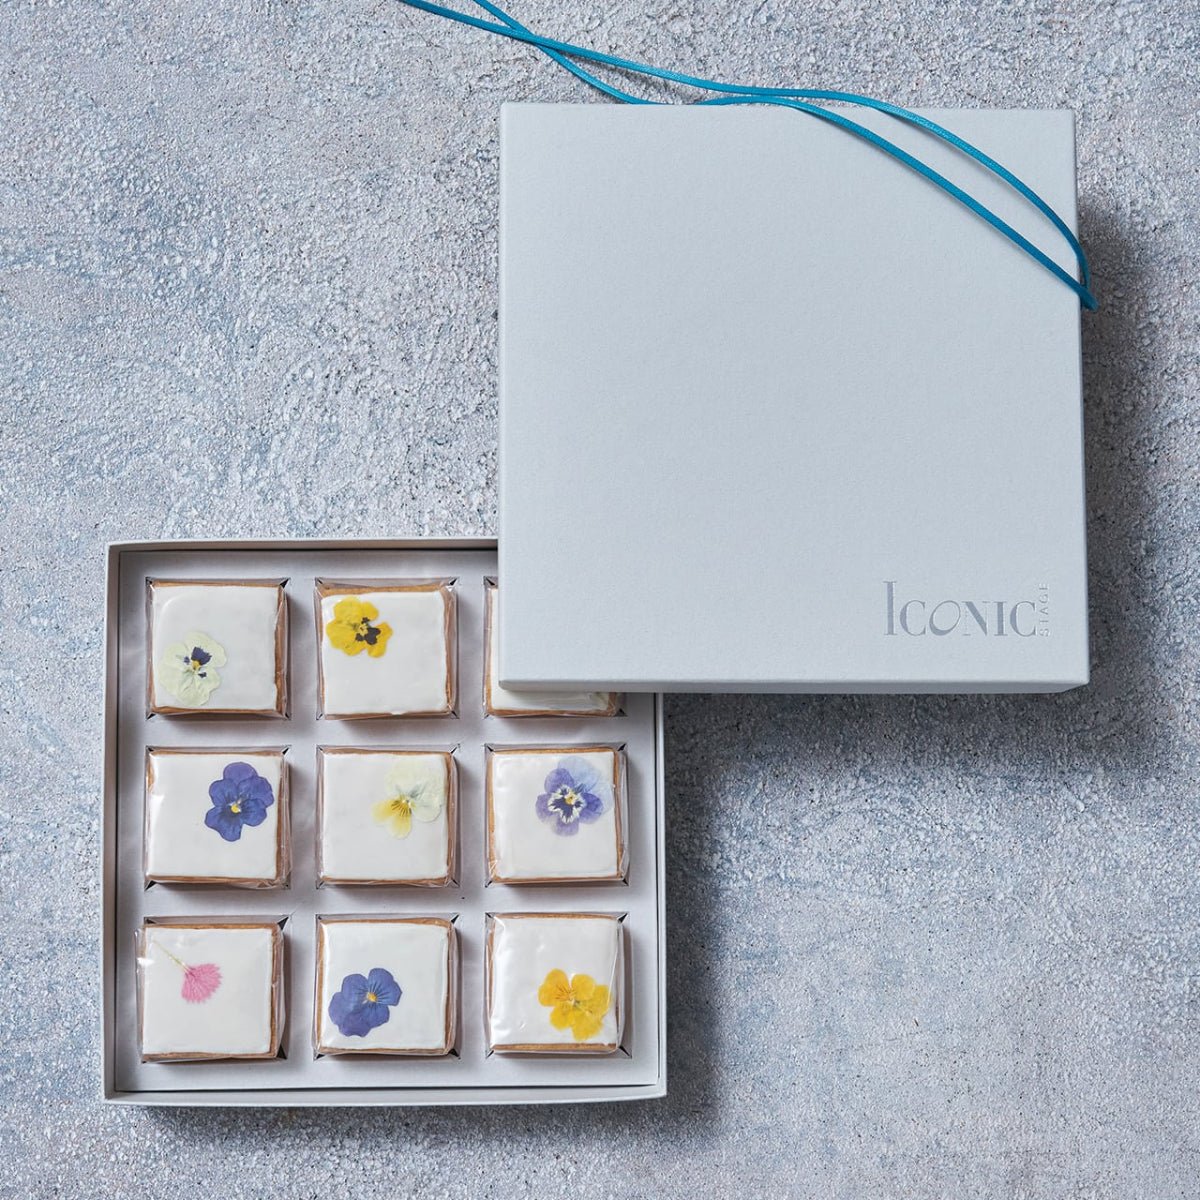 Iconic Stage Cube Cake Gift Box - Tokyo Fresh Direct